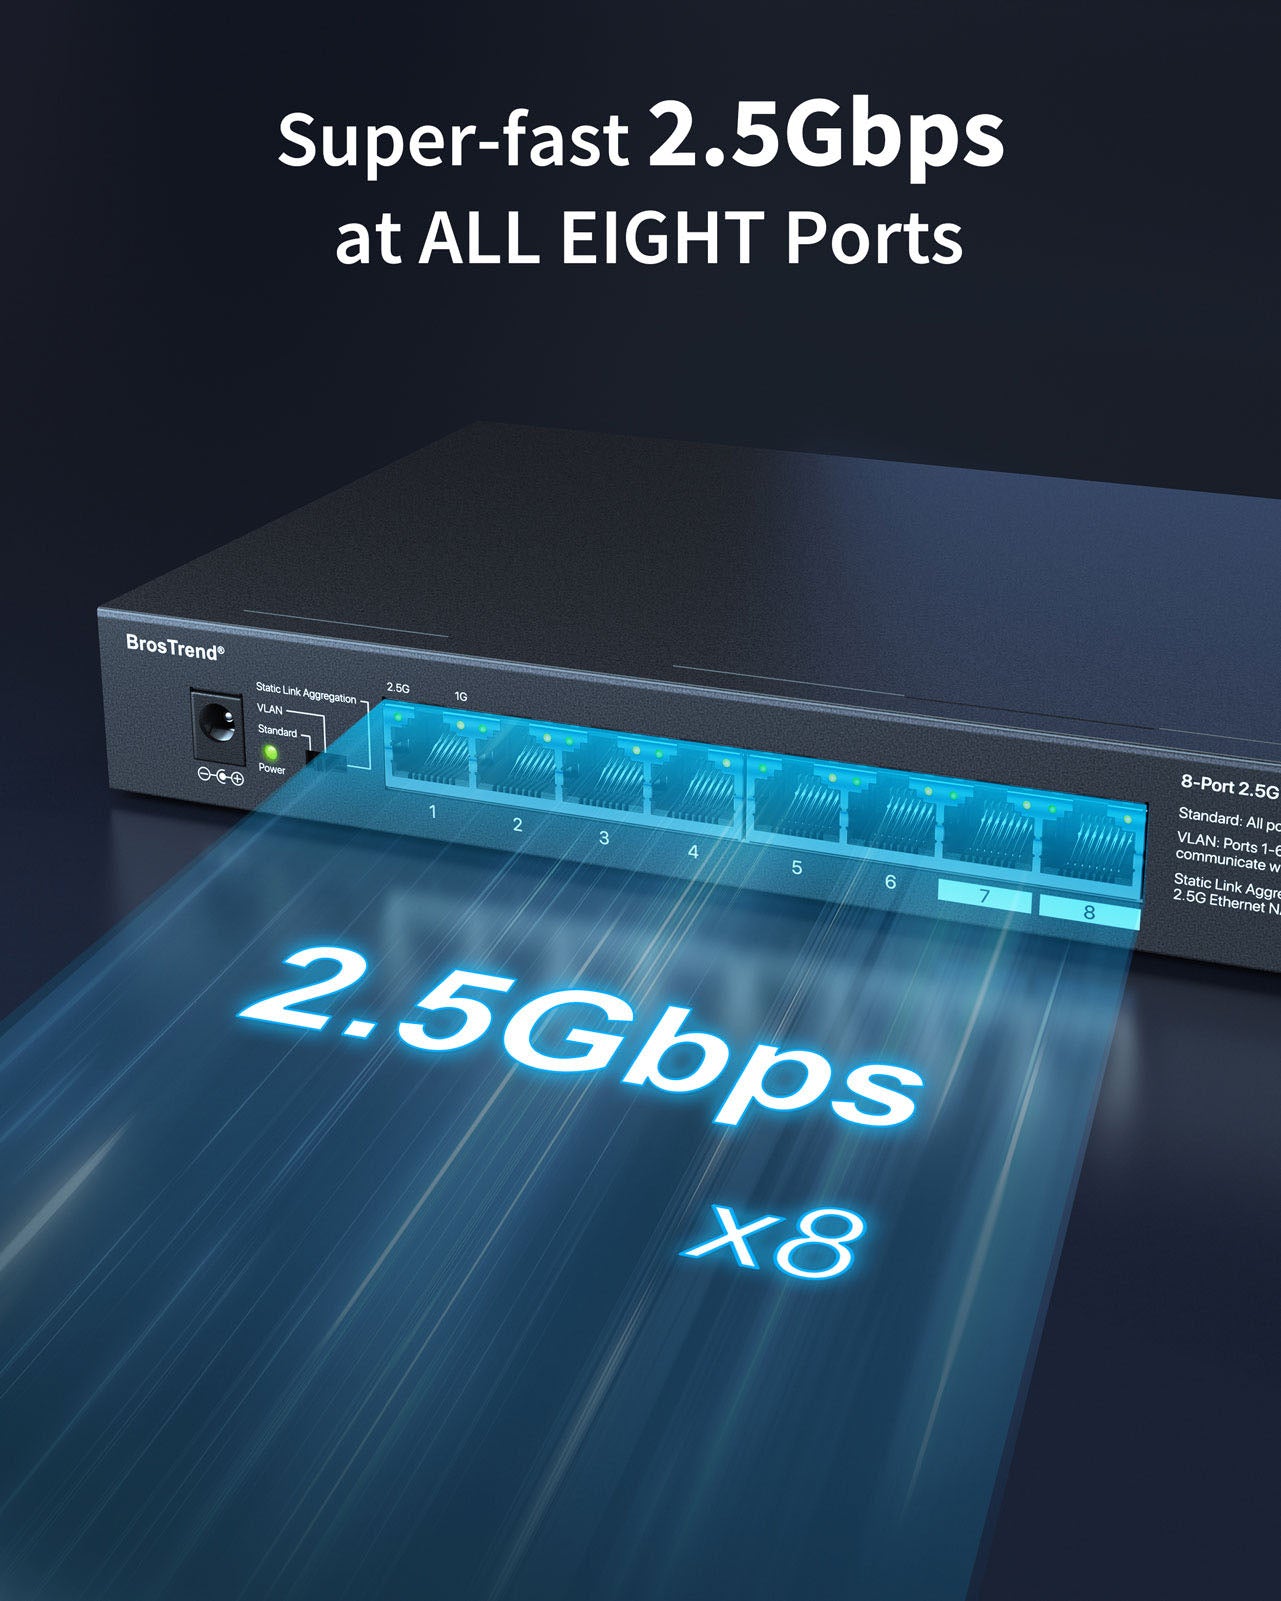 BrosTrend 8-port 2.5G Ethernet Switch Delivers Super-fast 2.5Gbps Speed at All Eight Ports Brings Best Performance of Your Multi-gigabit Devices and Bandwidth with 40G Switching Capacity